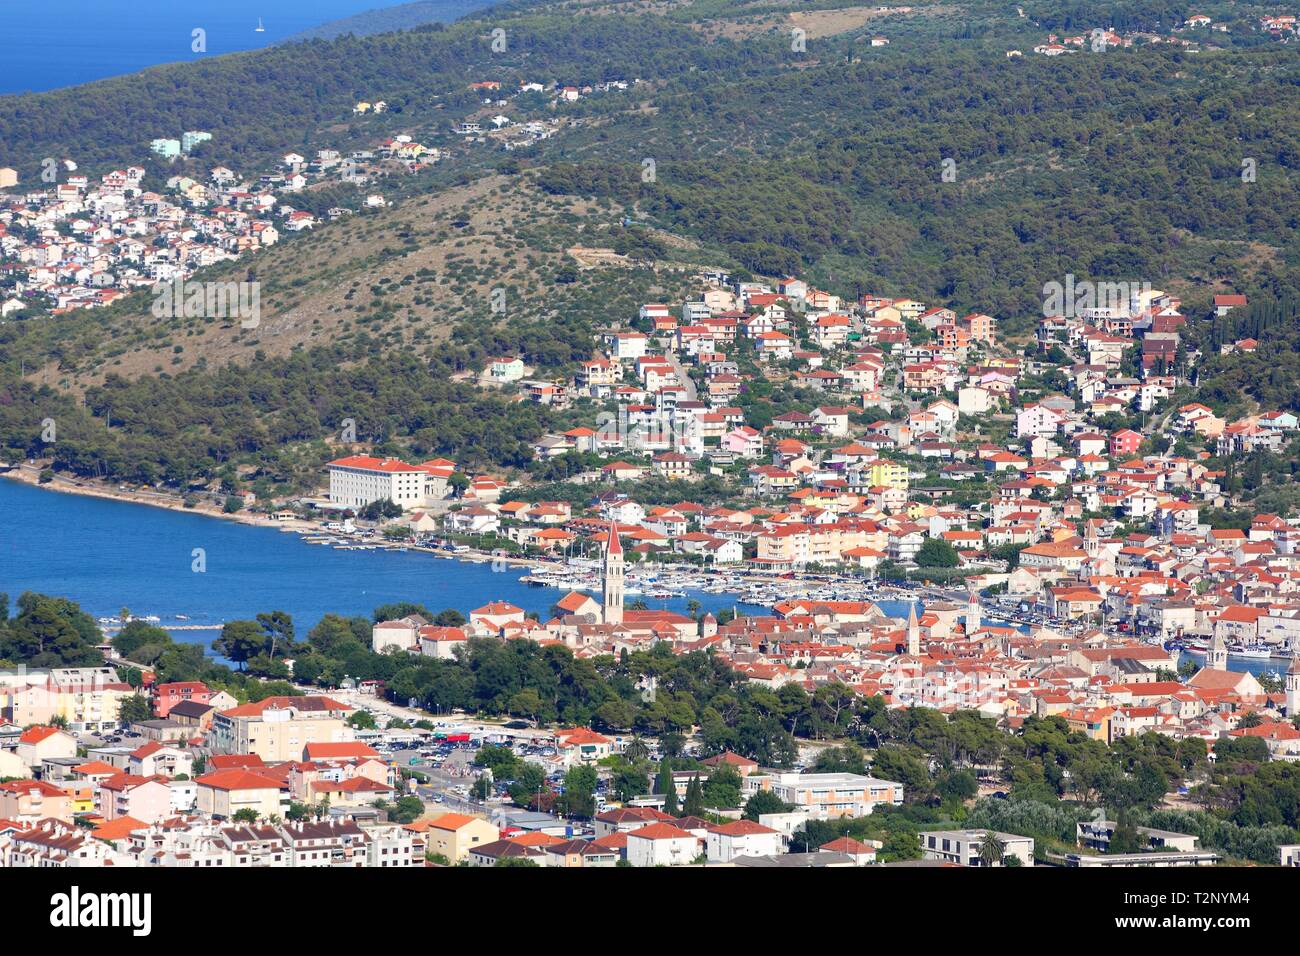 Trogir, Croatia - aerial view of the UNESCO listed Old Town. Dalmatia region. Stock Photo